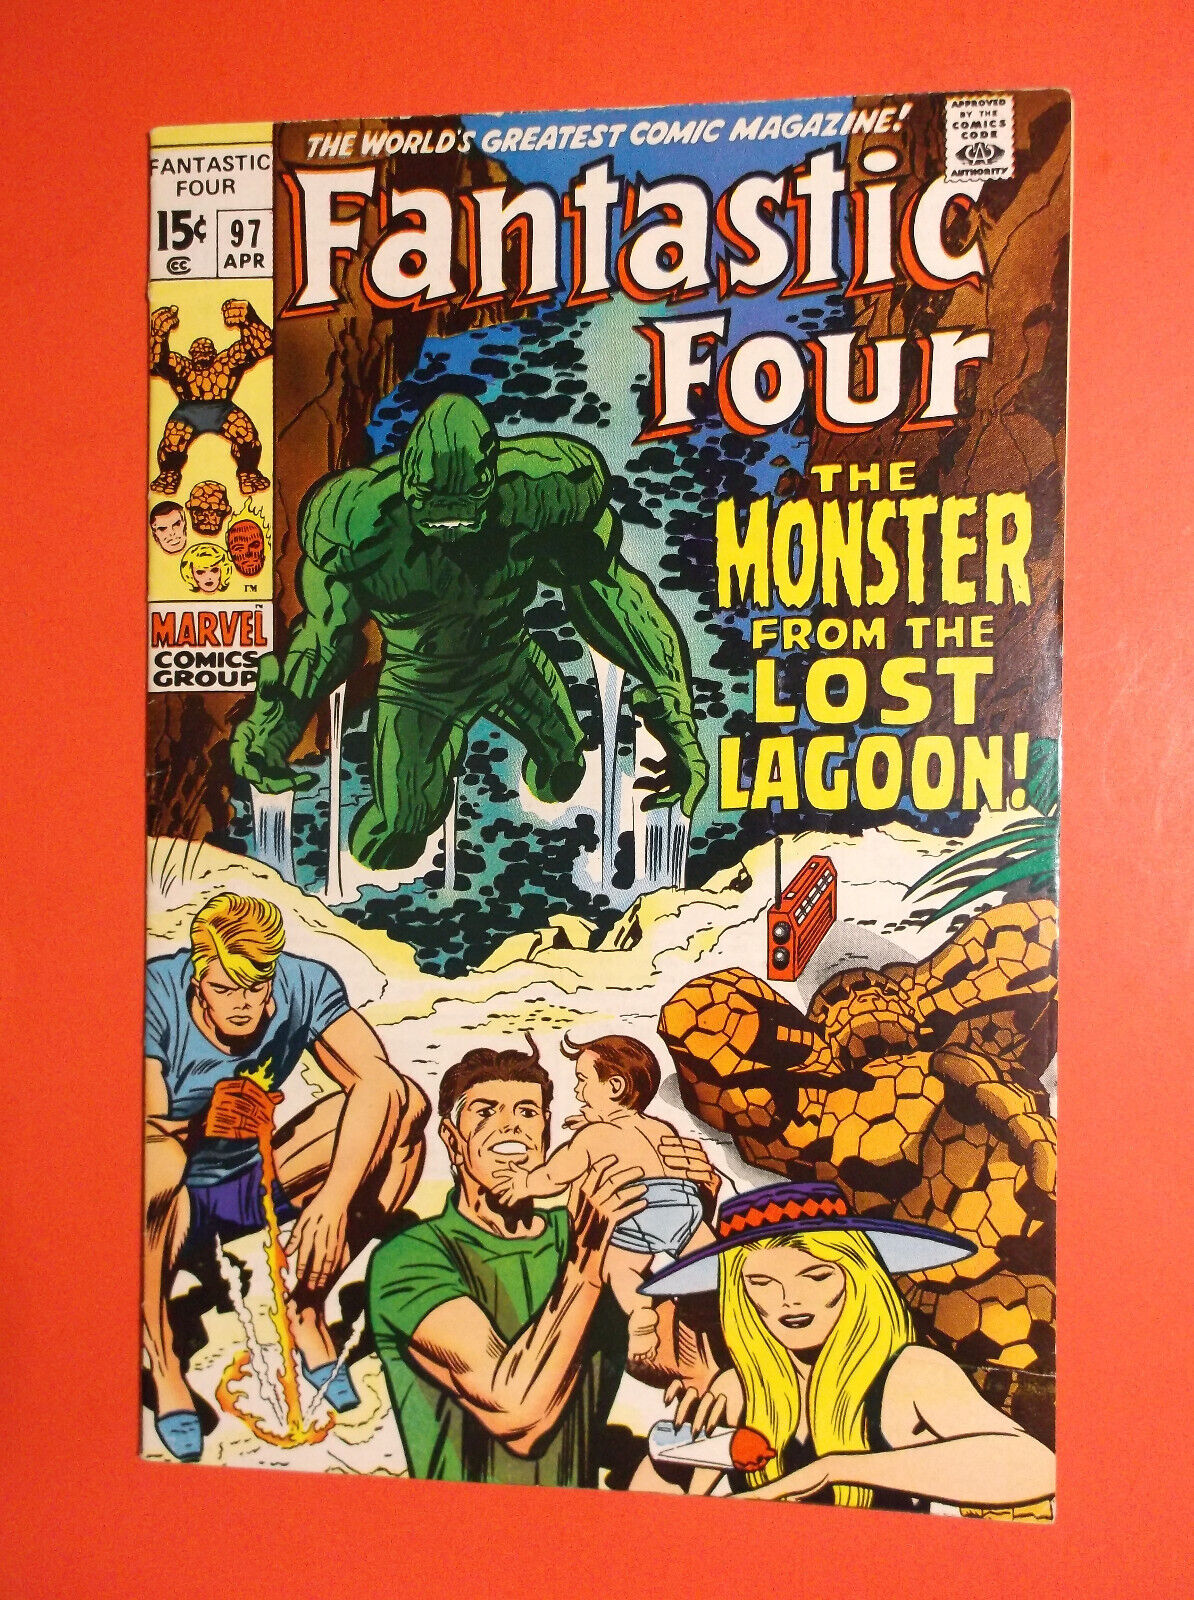 THE FANTASTIC FOUR # 97 - VF+ 8.5/9.0 - LOST LAGOON MONSTER - 1970 BEAUTY